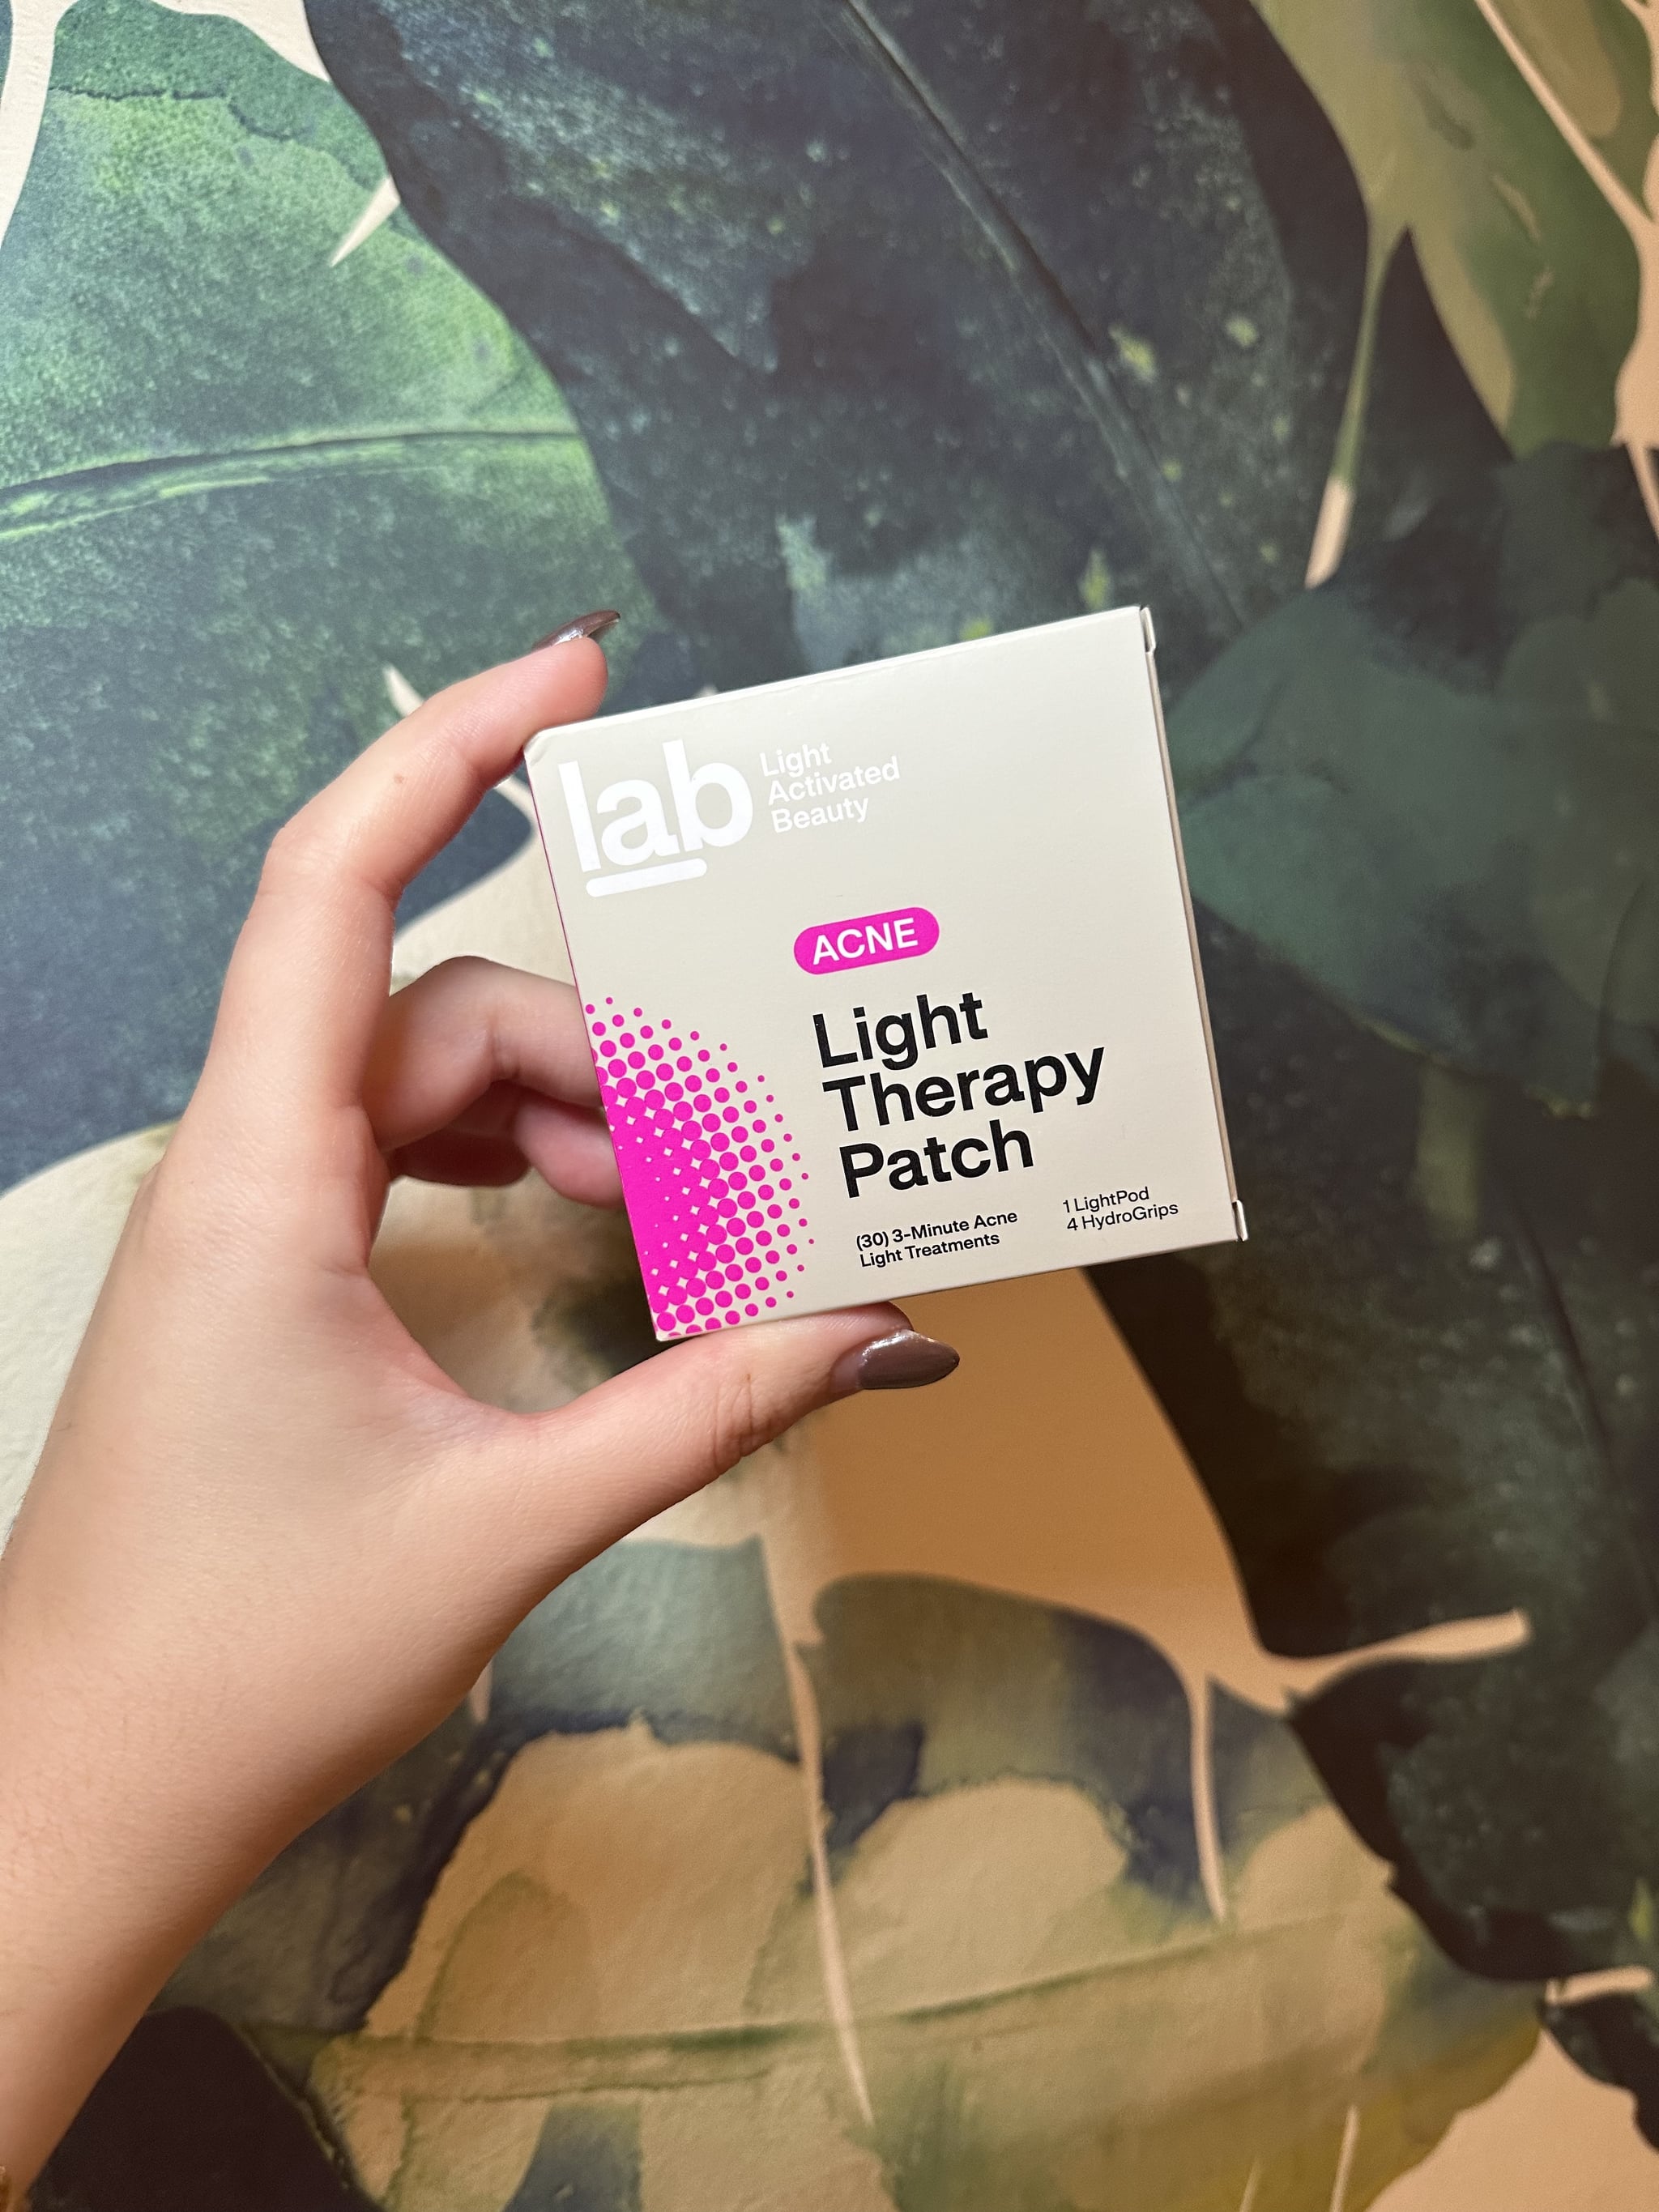 L.a.b. Acne Light Therapy Patch review